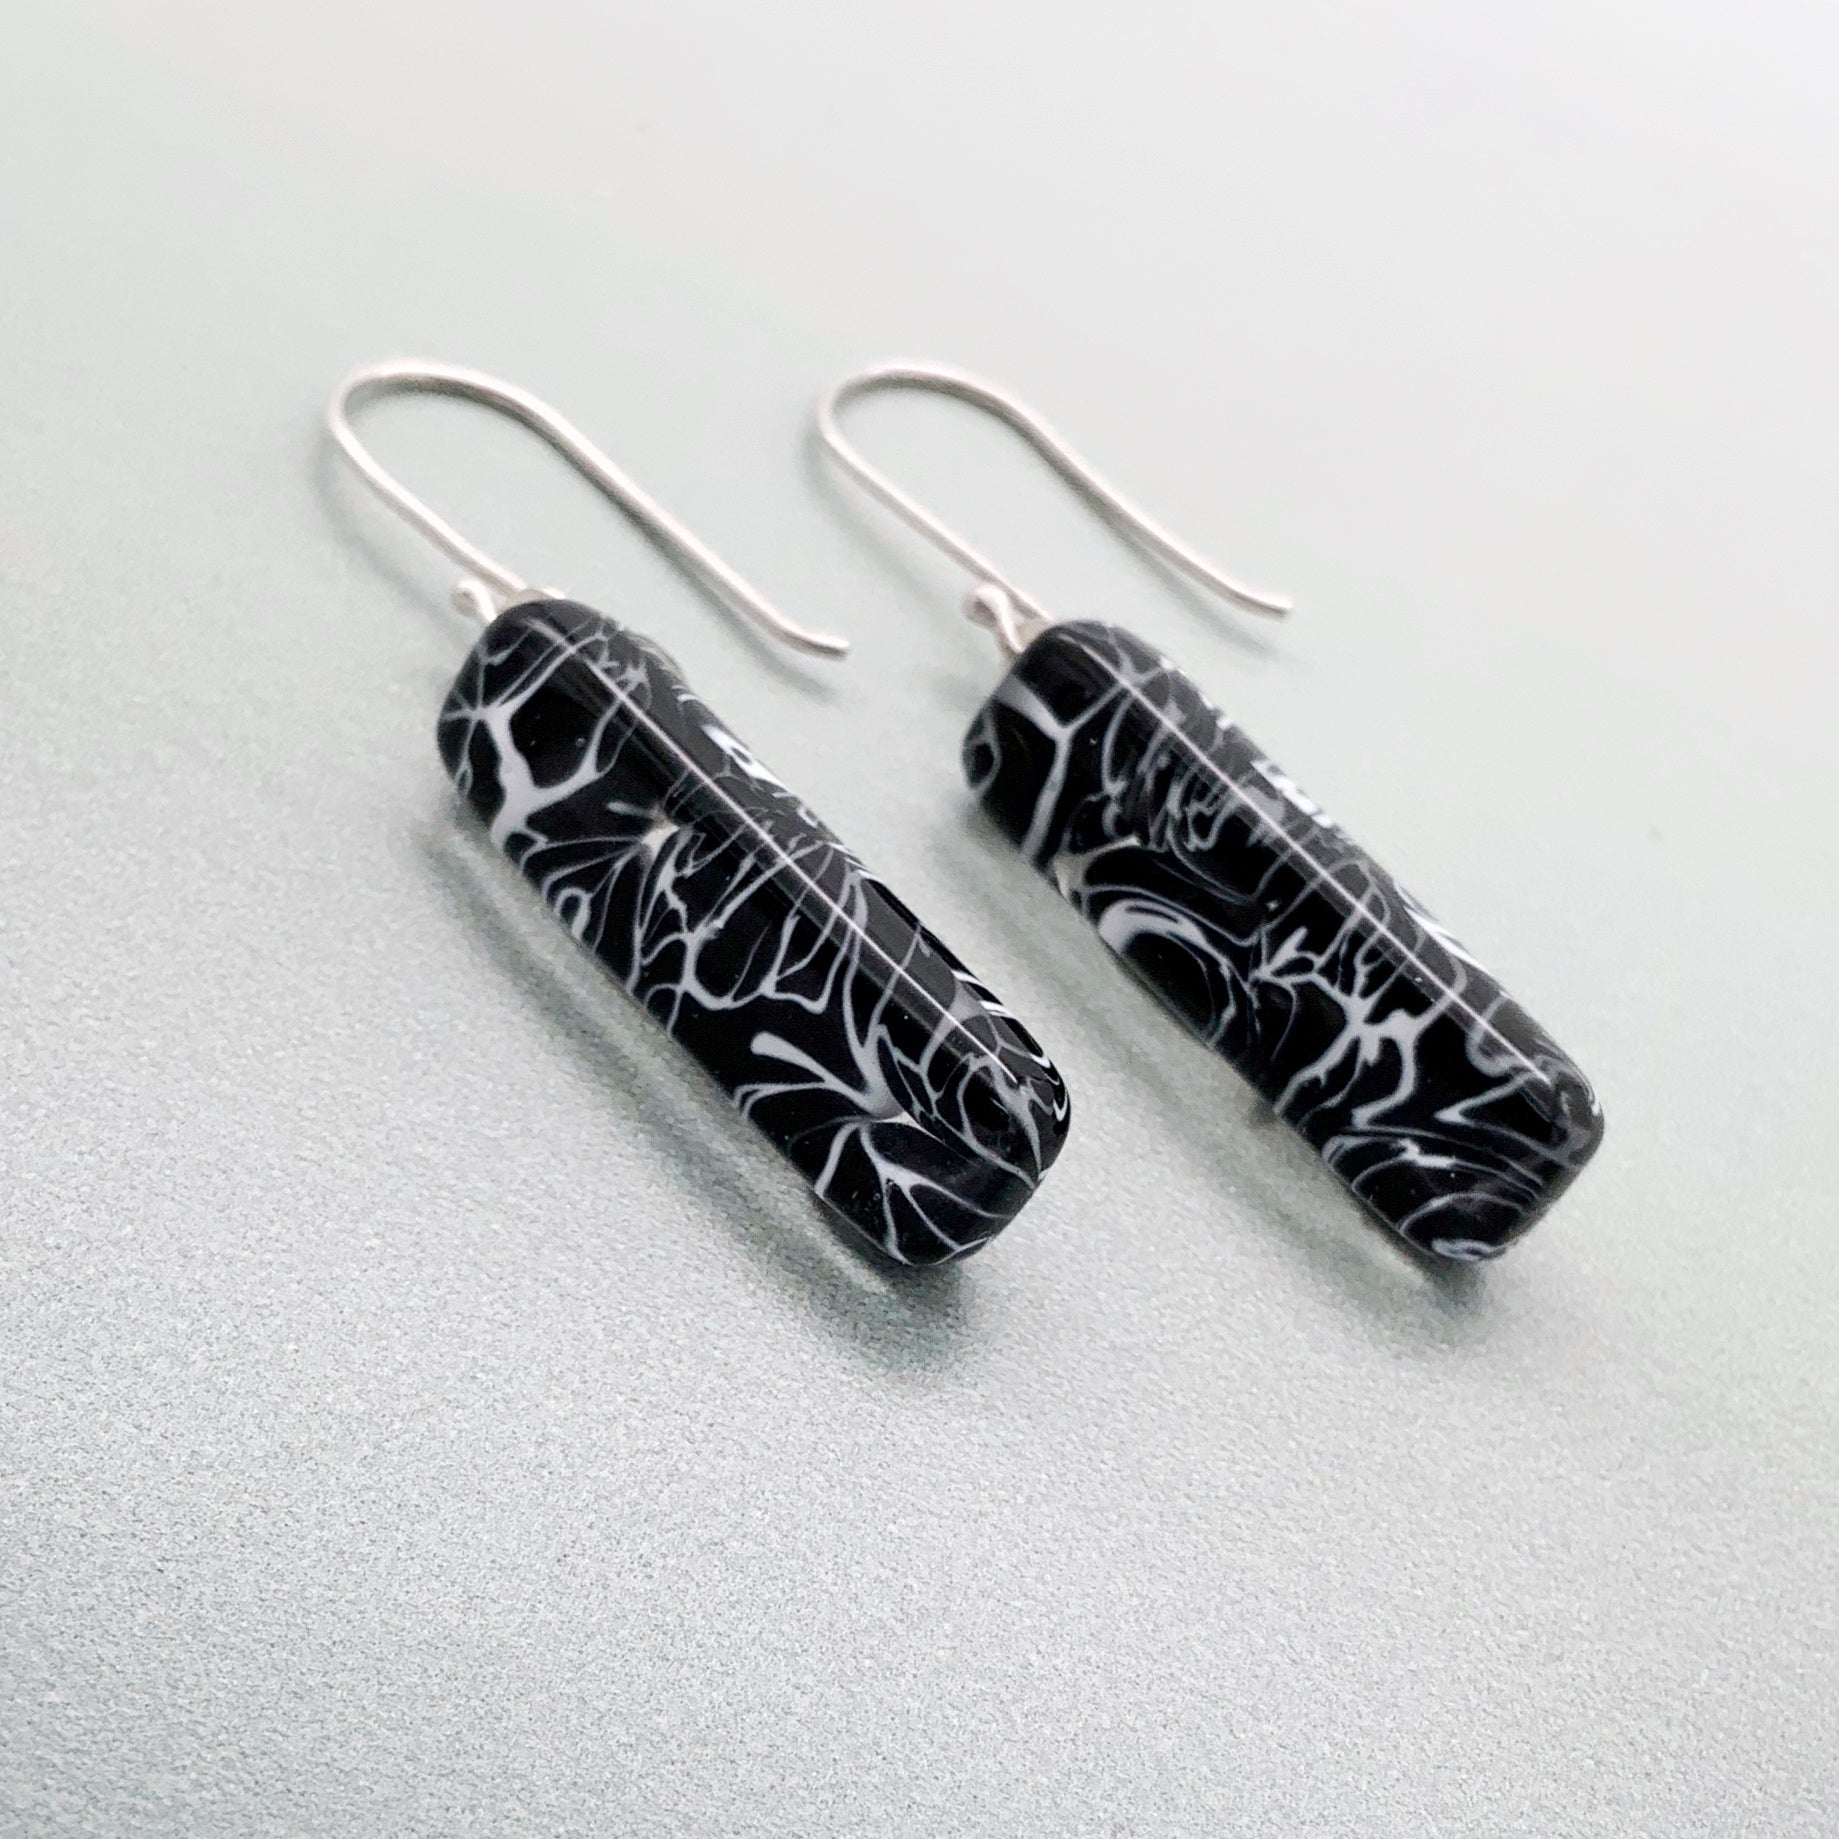 Marmo glass long dangle Earrings -Black and White marble